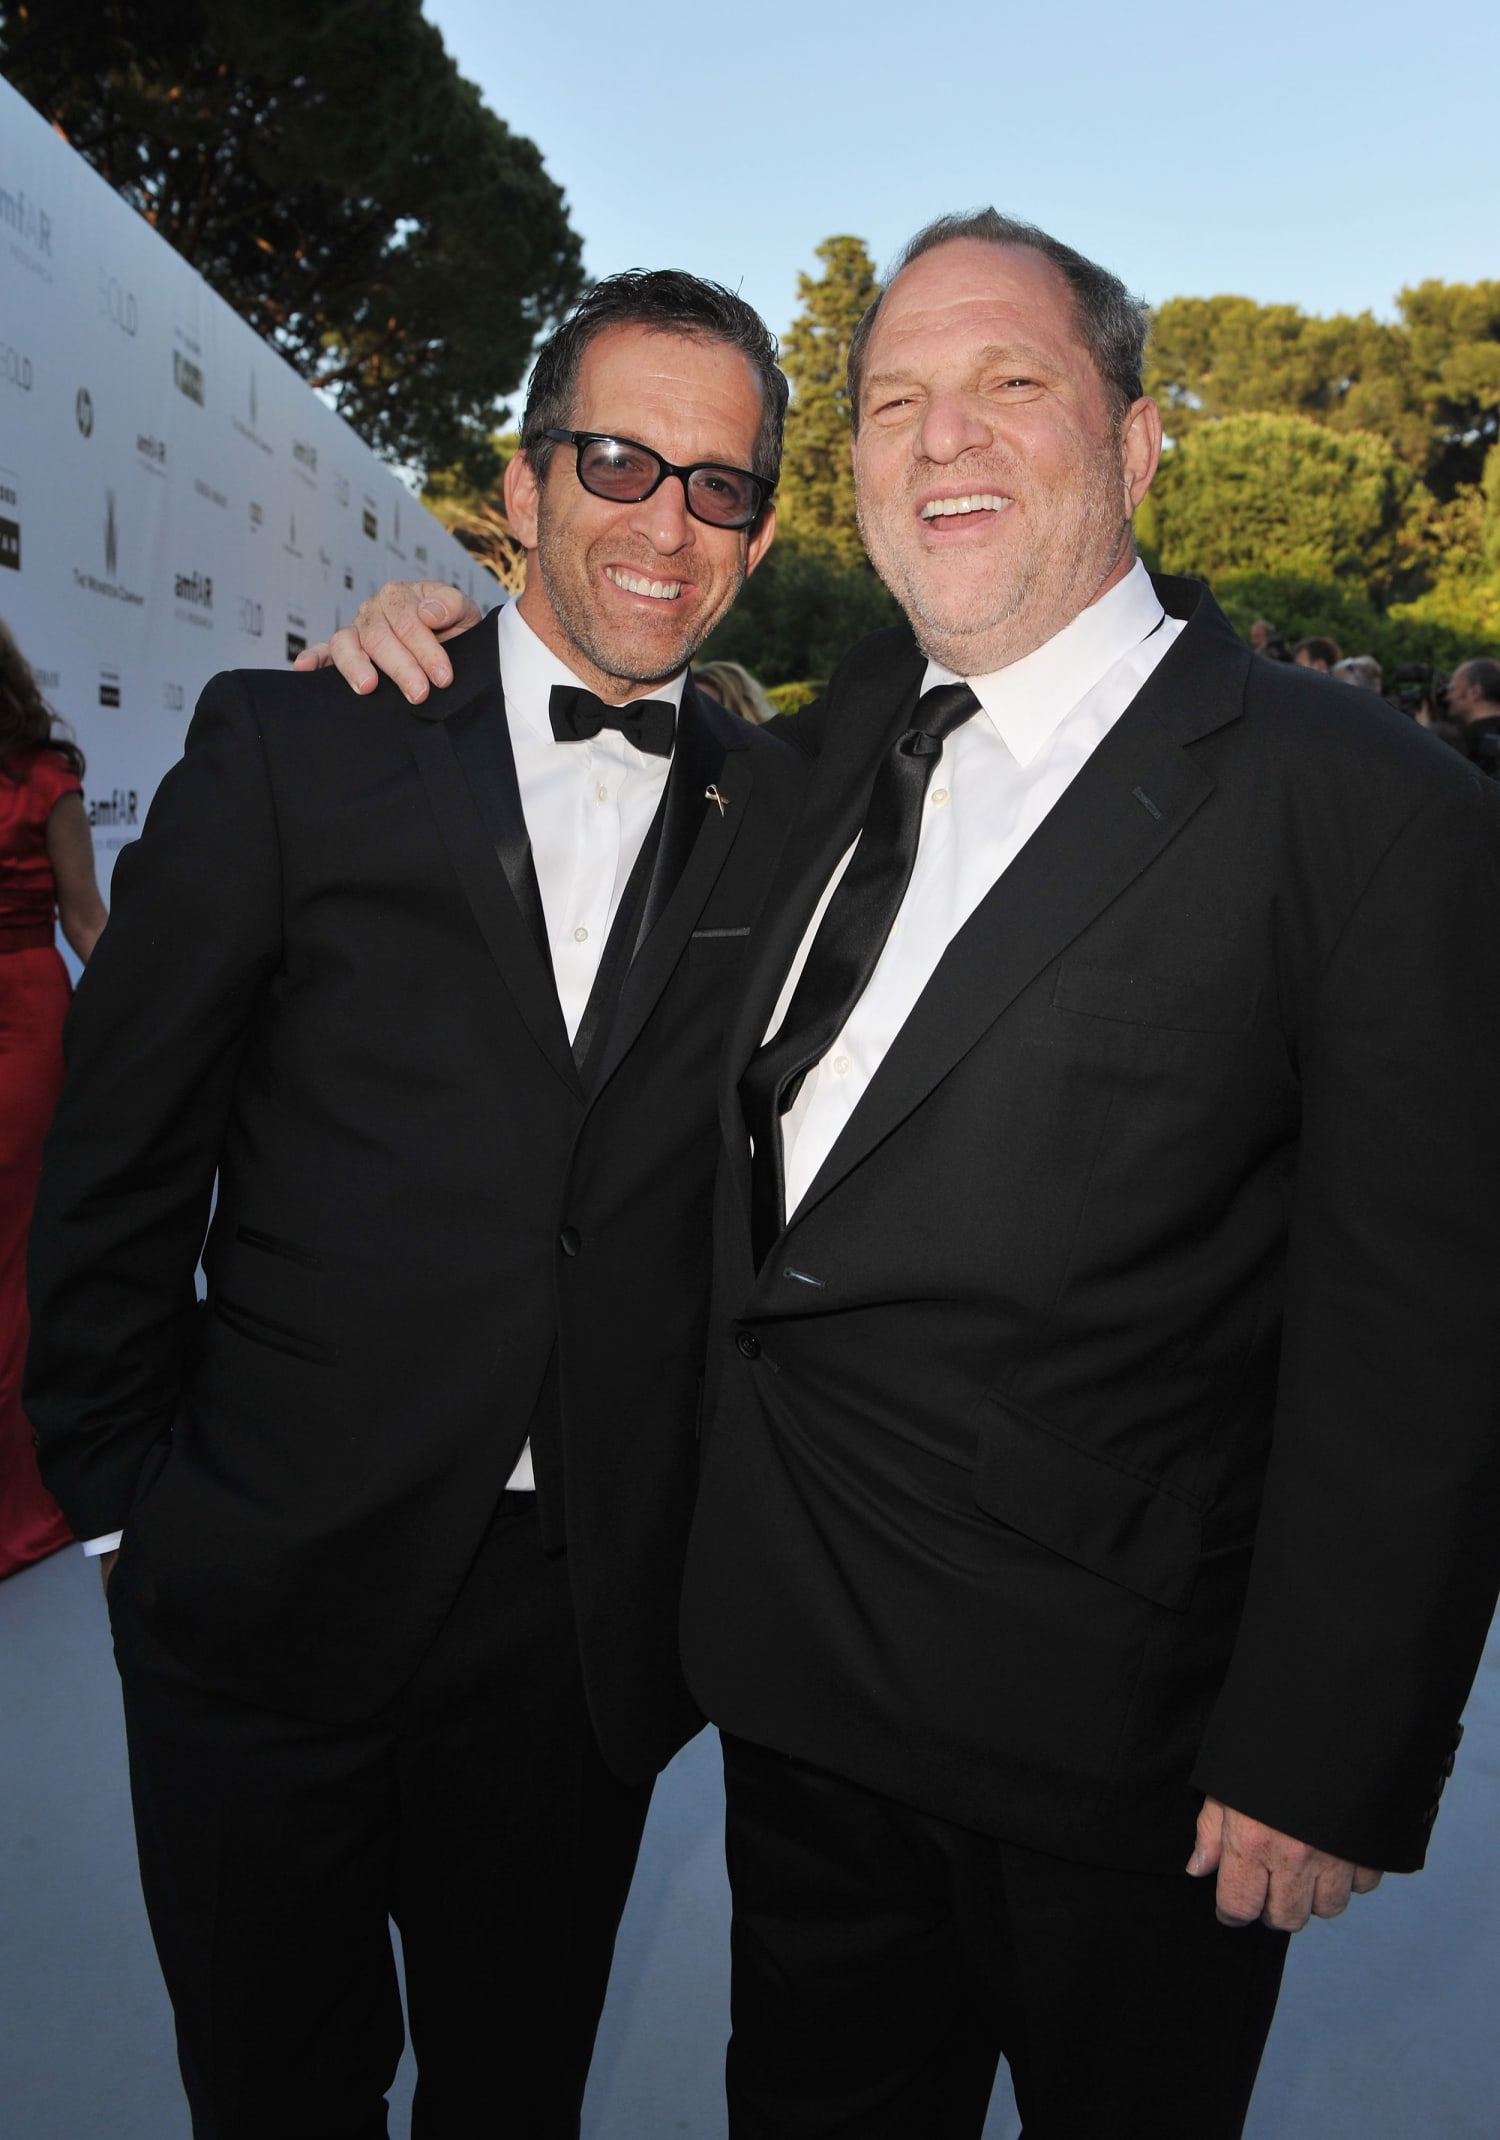 Kenneth Cole pushed out as amfAR chair in wake of Weinstein flap